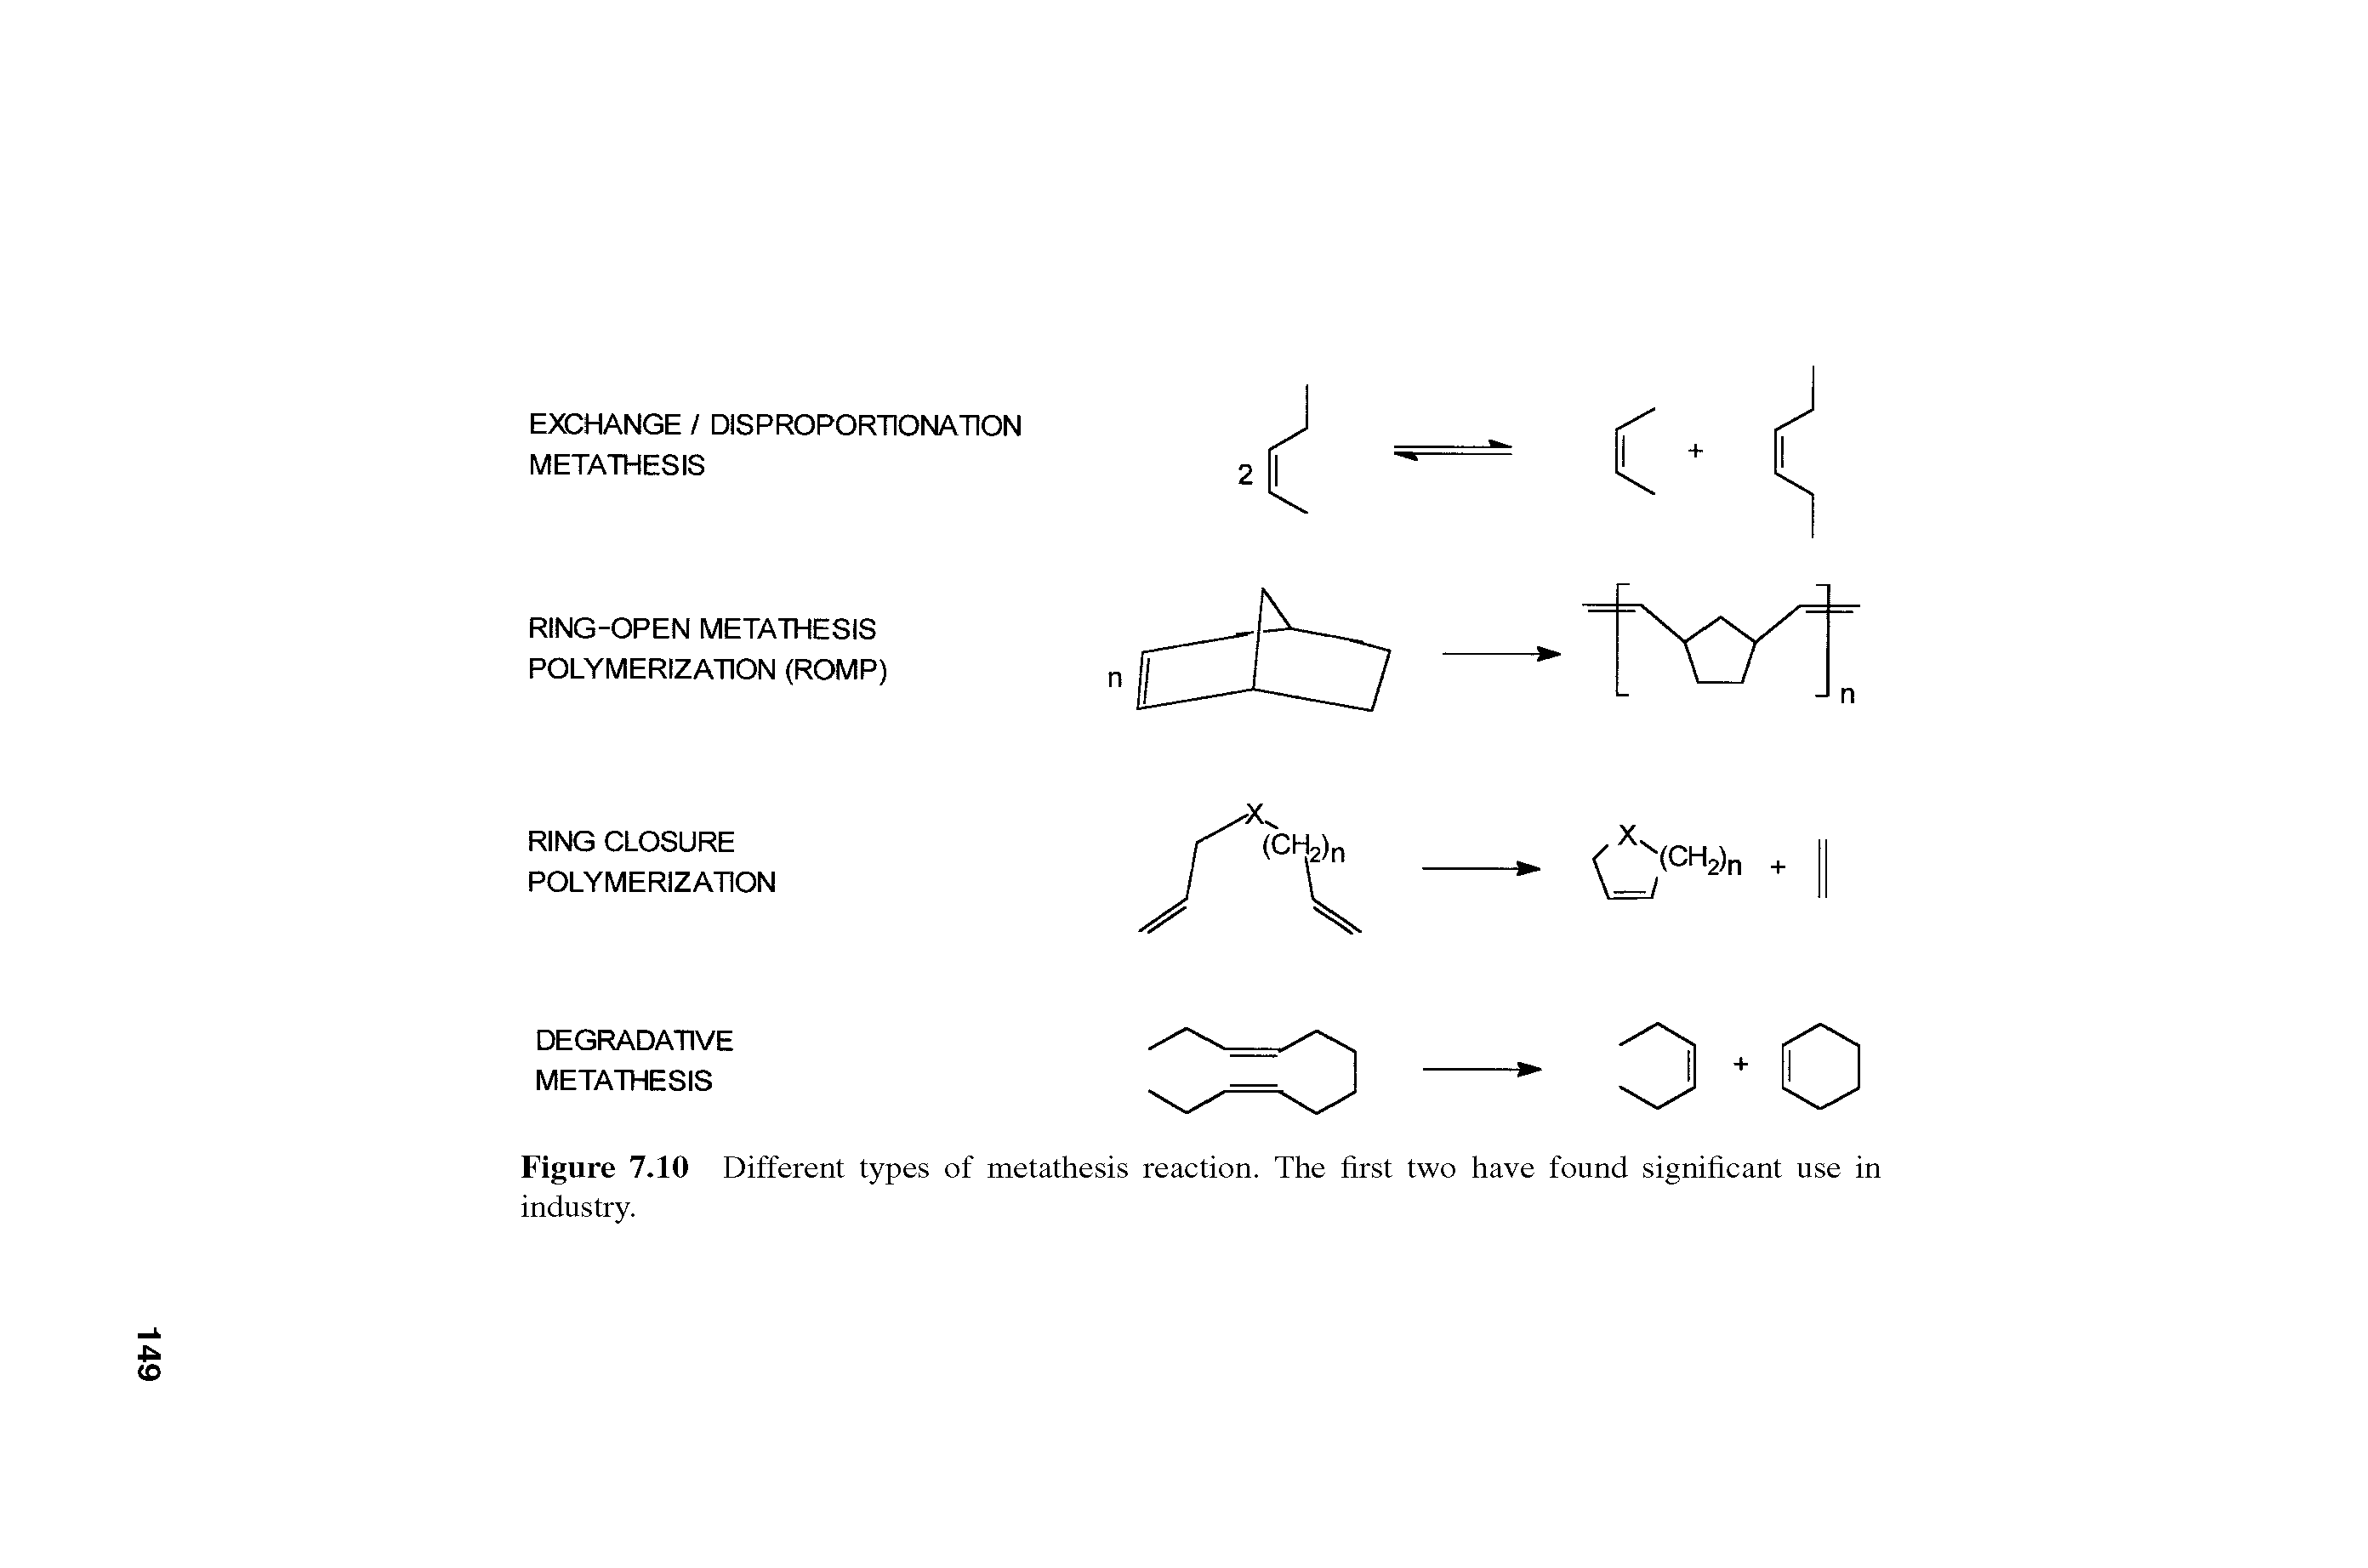 Figure 7.10 Different types of metathesis reaction. The first two have found significant use in industry.